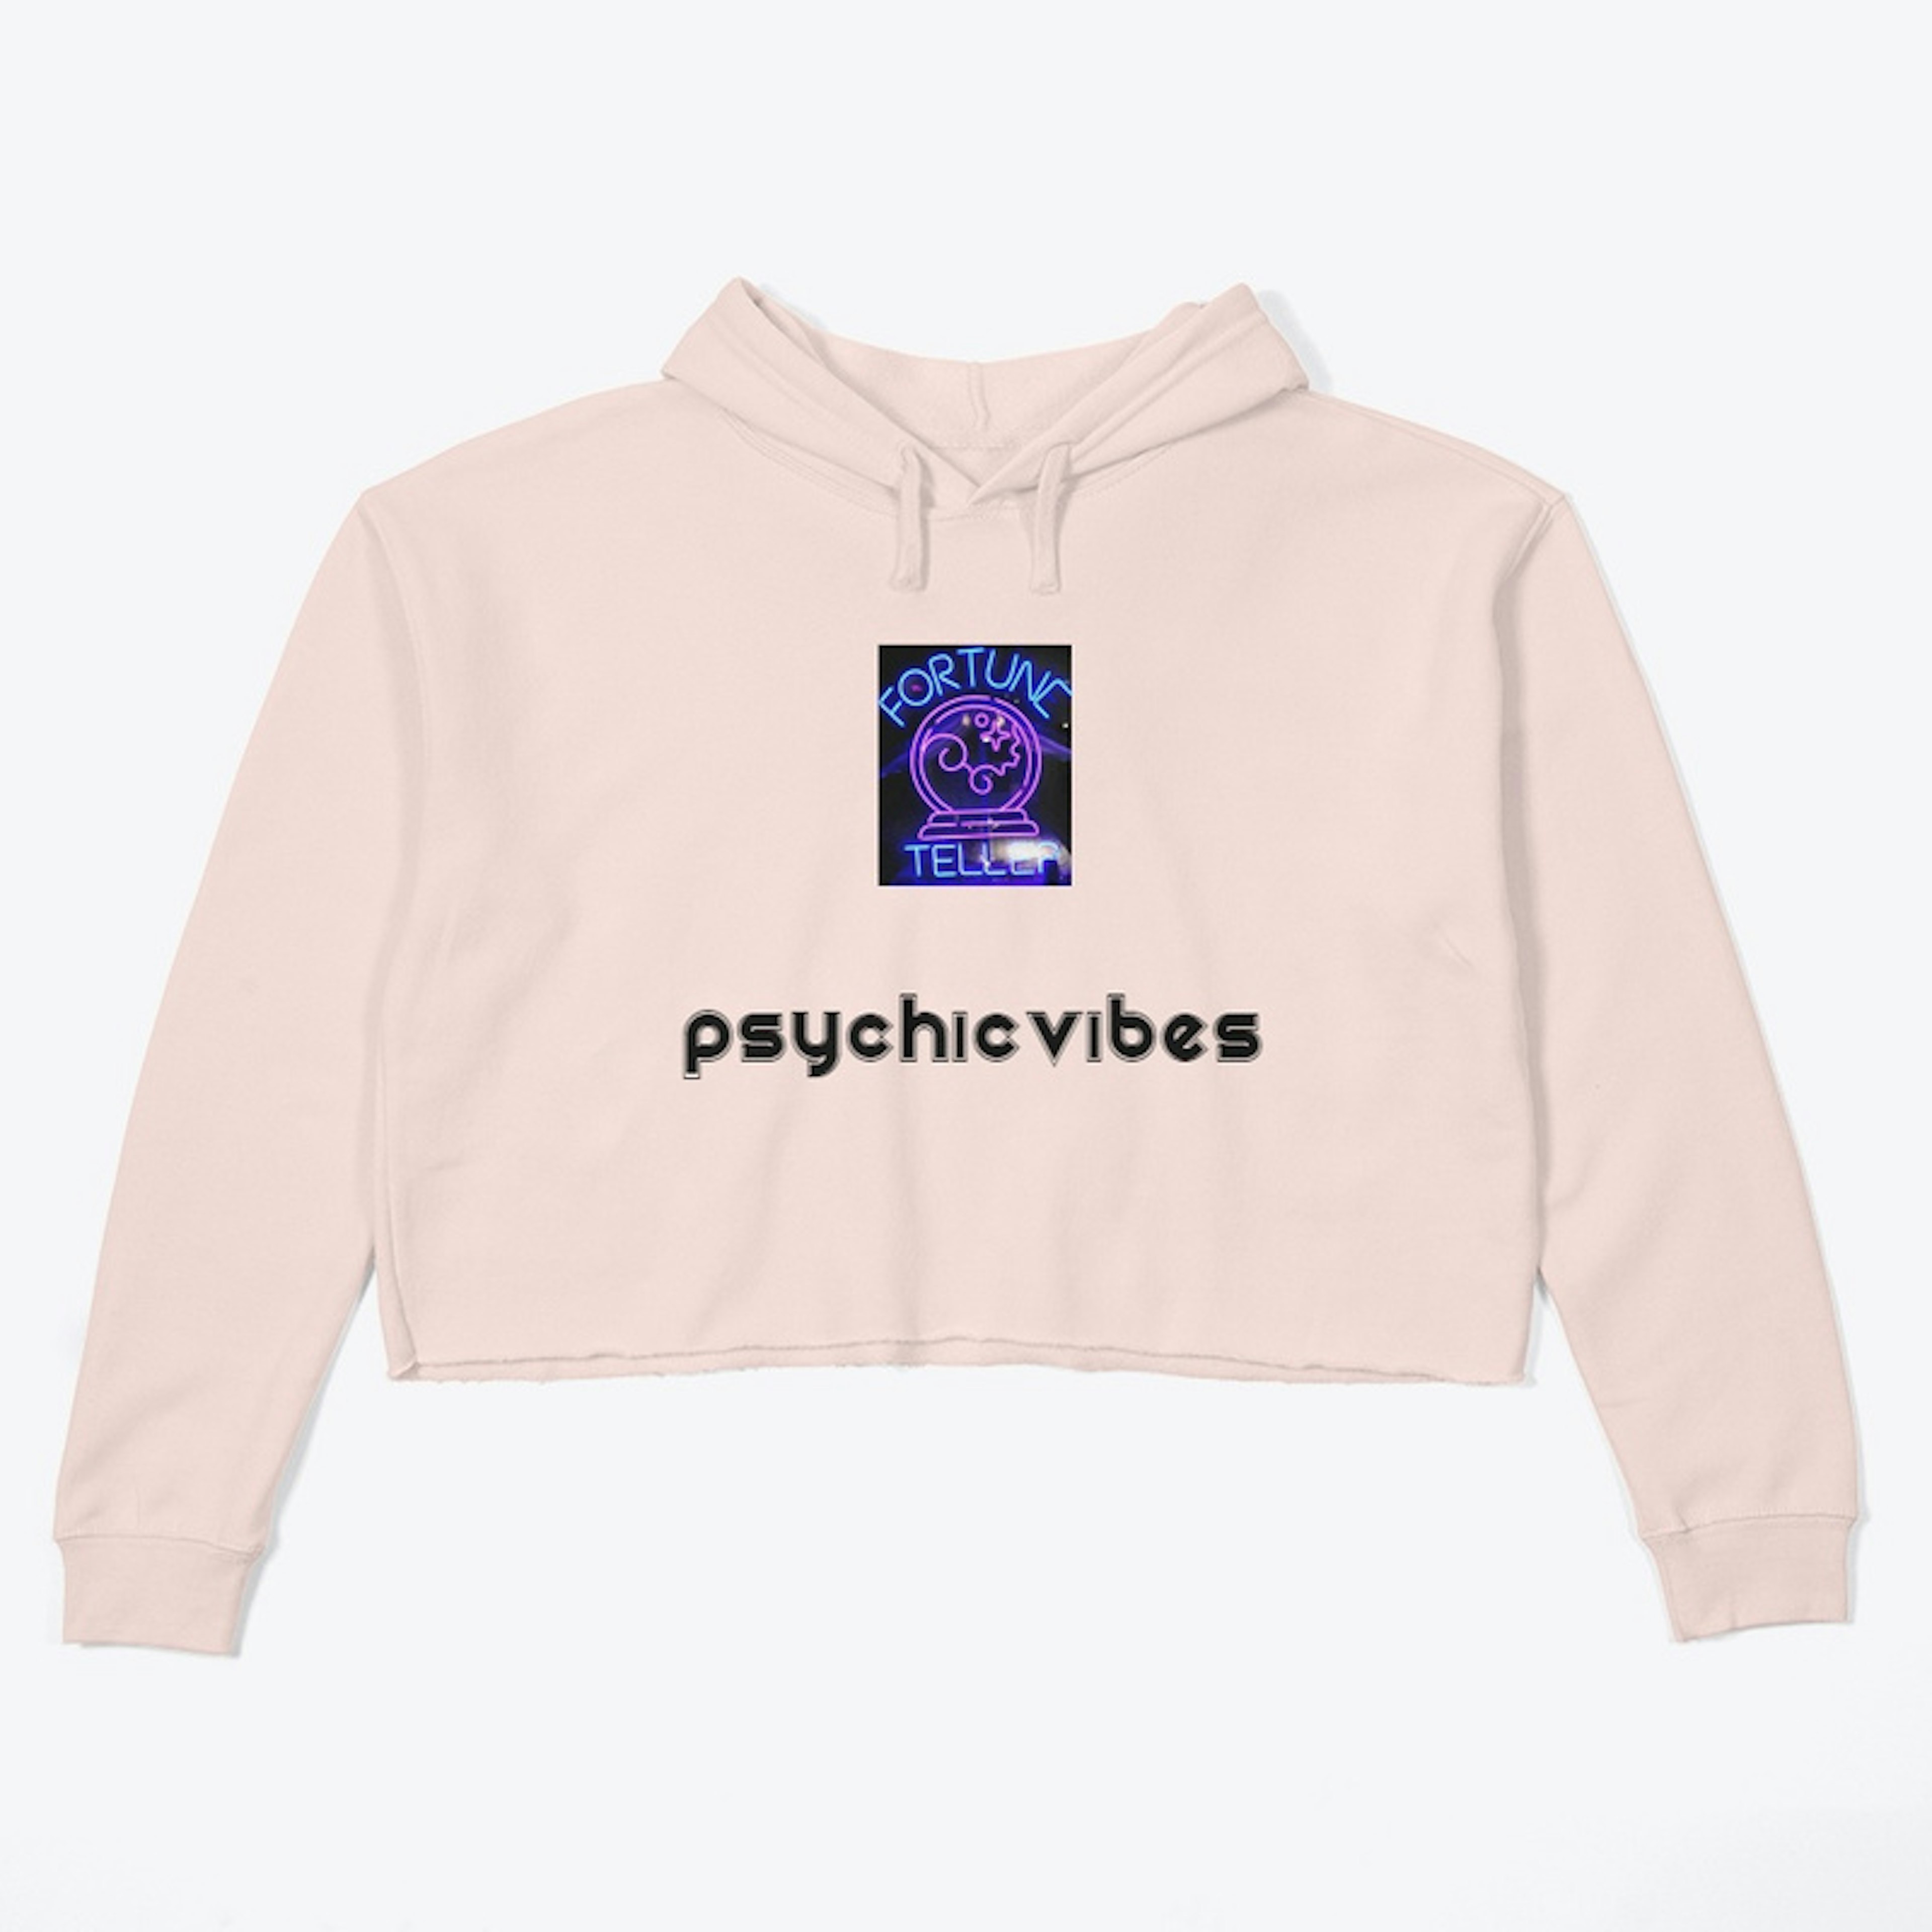 Psychic Vibes Top